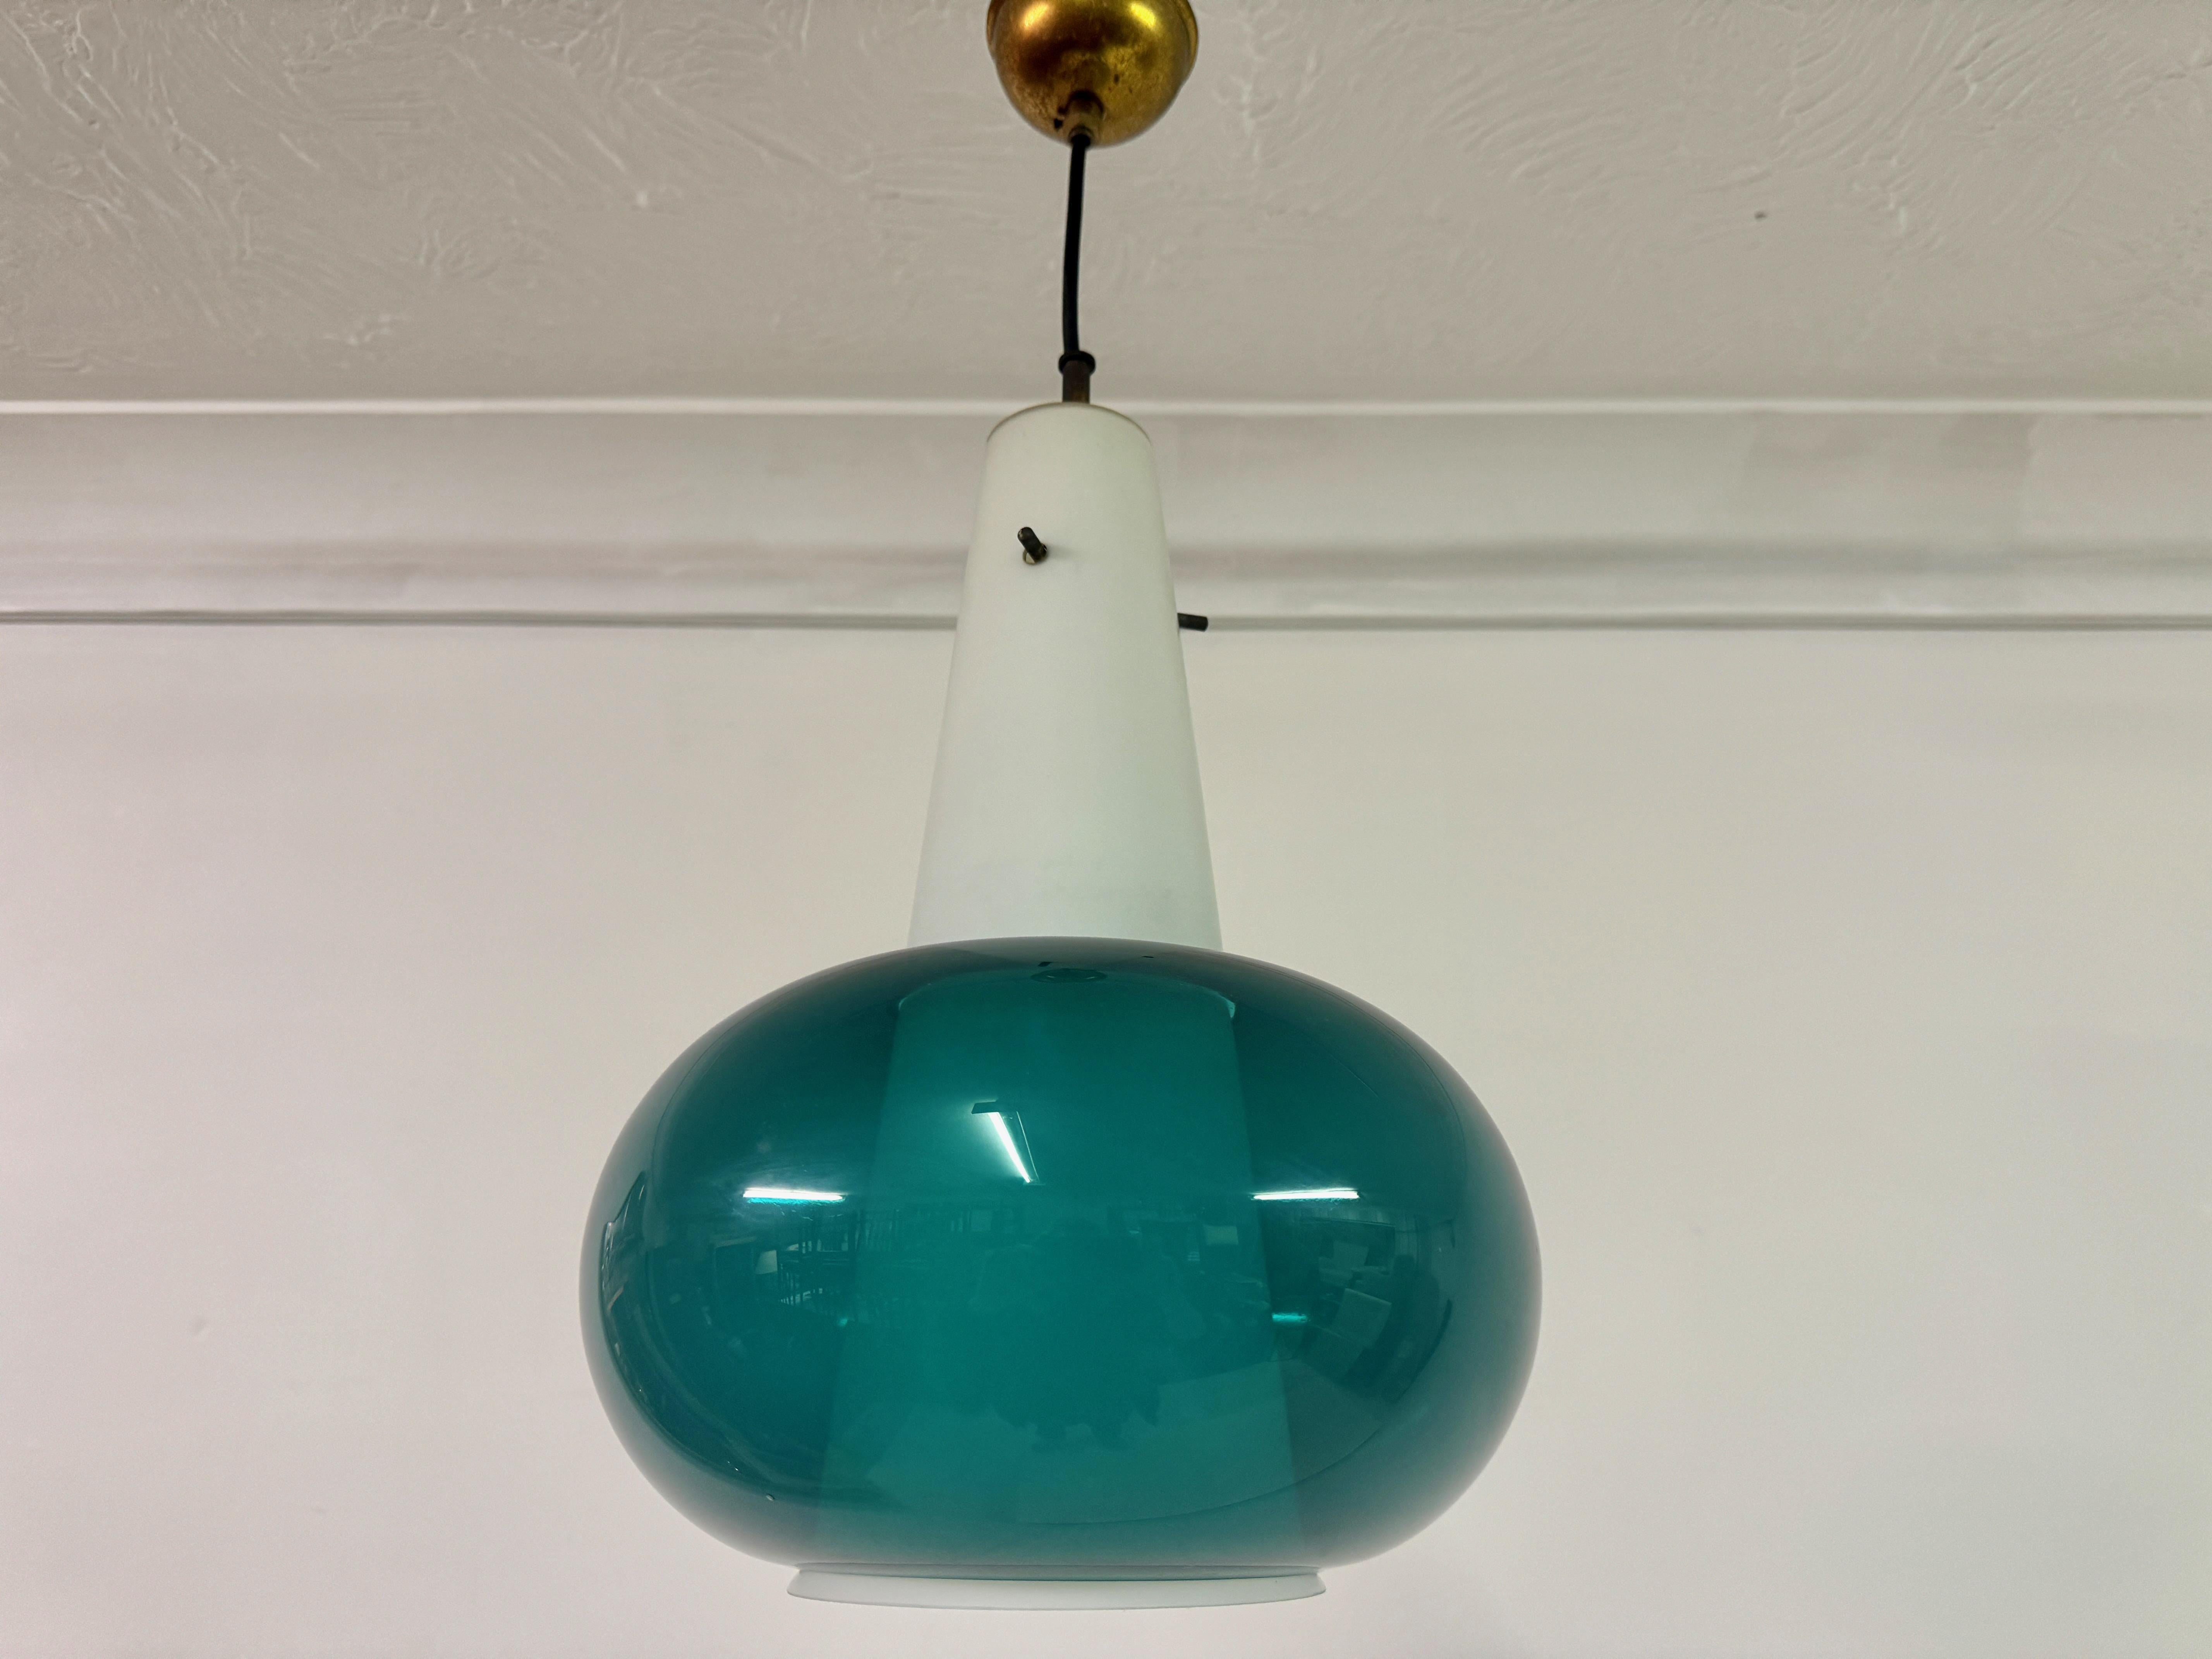 Ceiling pendant

White glass cone

Green glass shade

Brass fittings

Italy 1960s